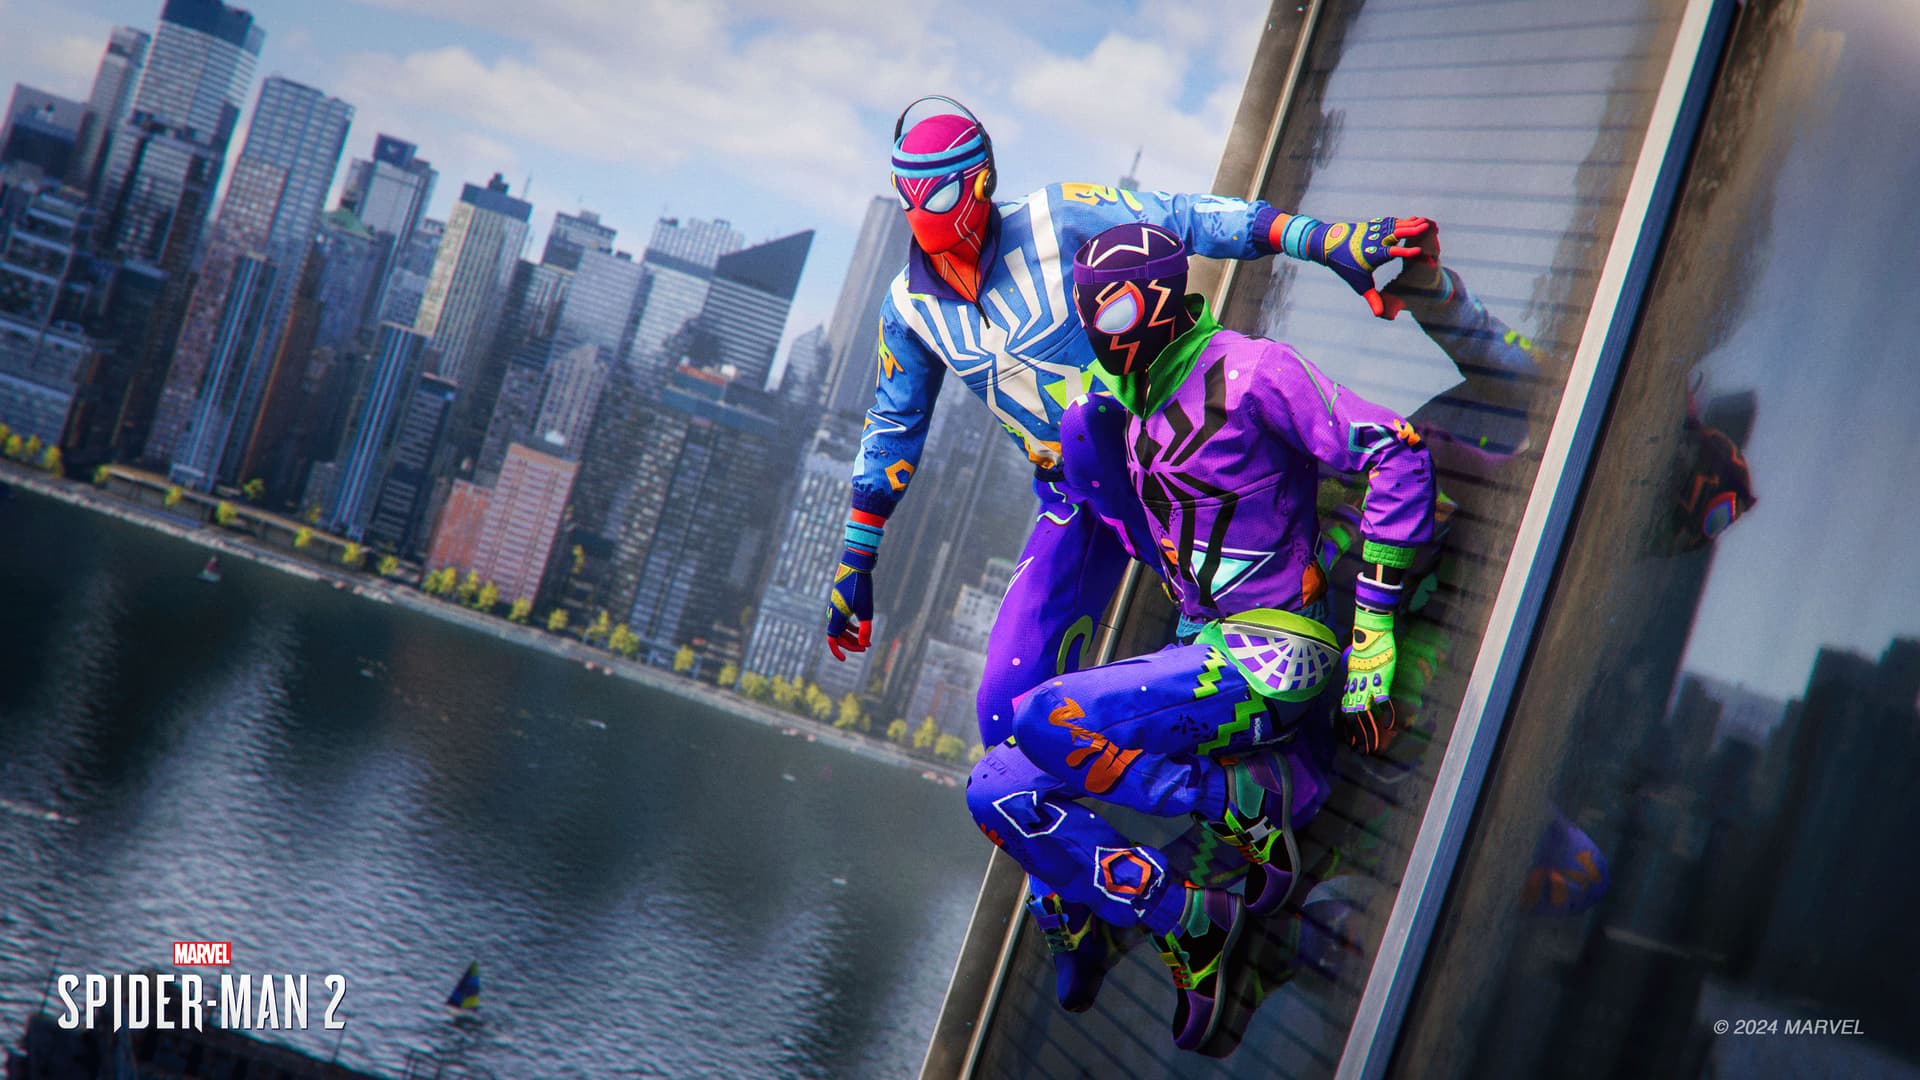 'Marvel's Spider-Man 2' Update Adds New Game Plus and New Suits on March 7